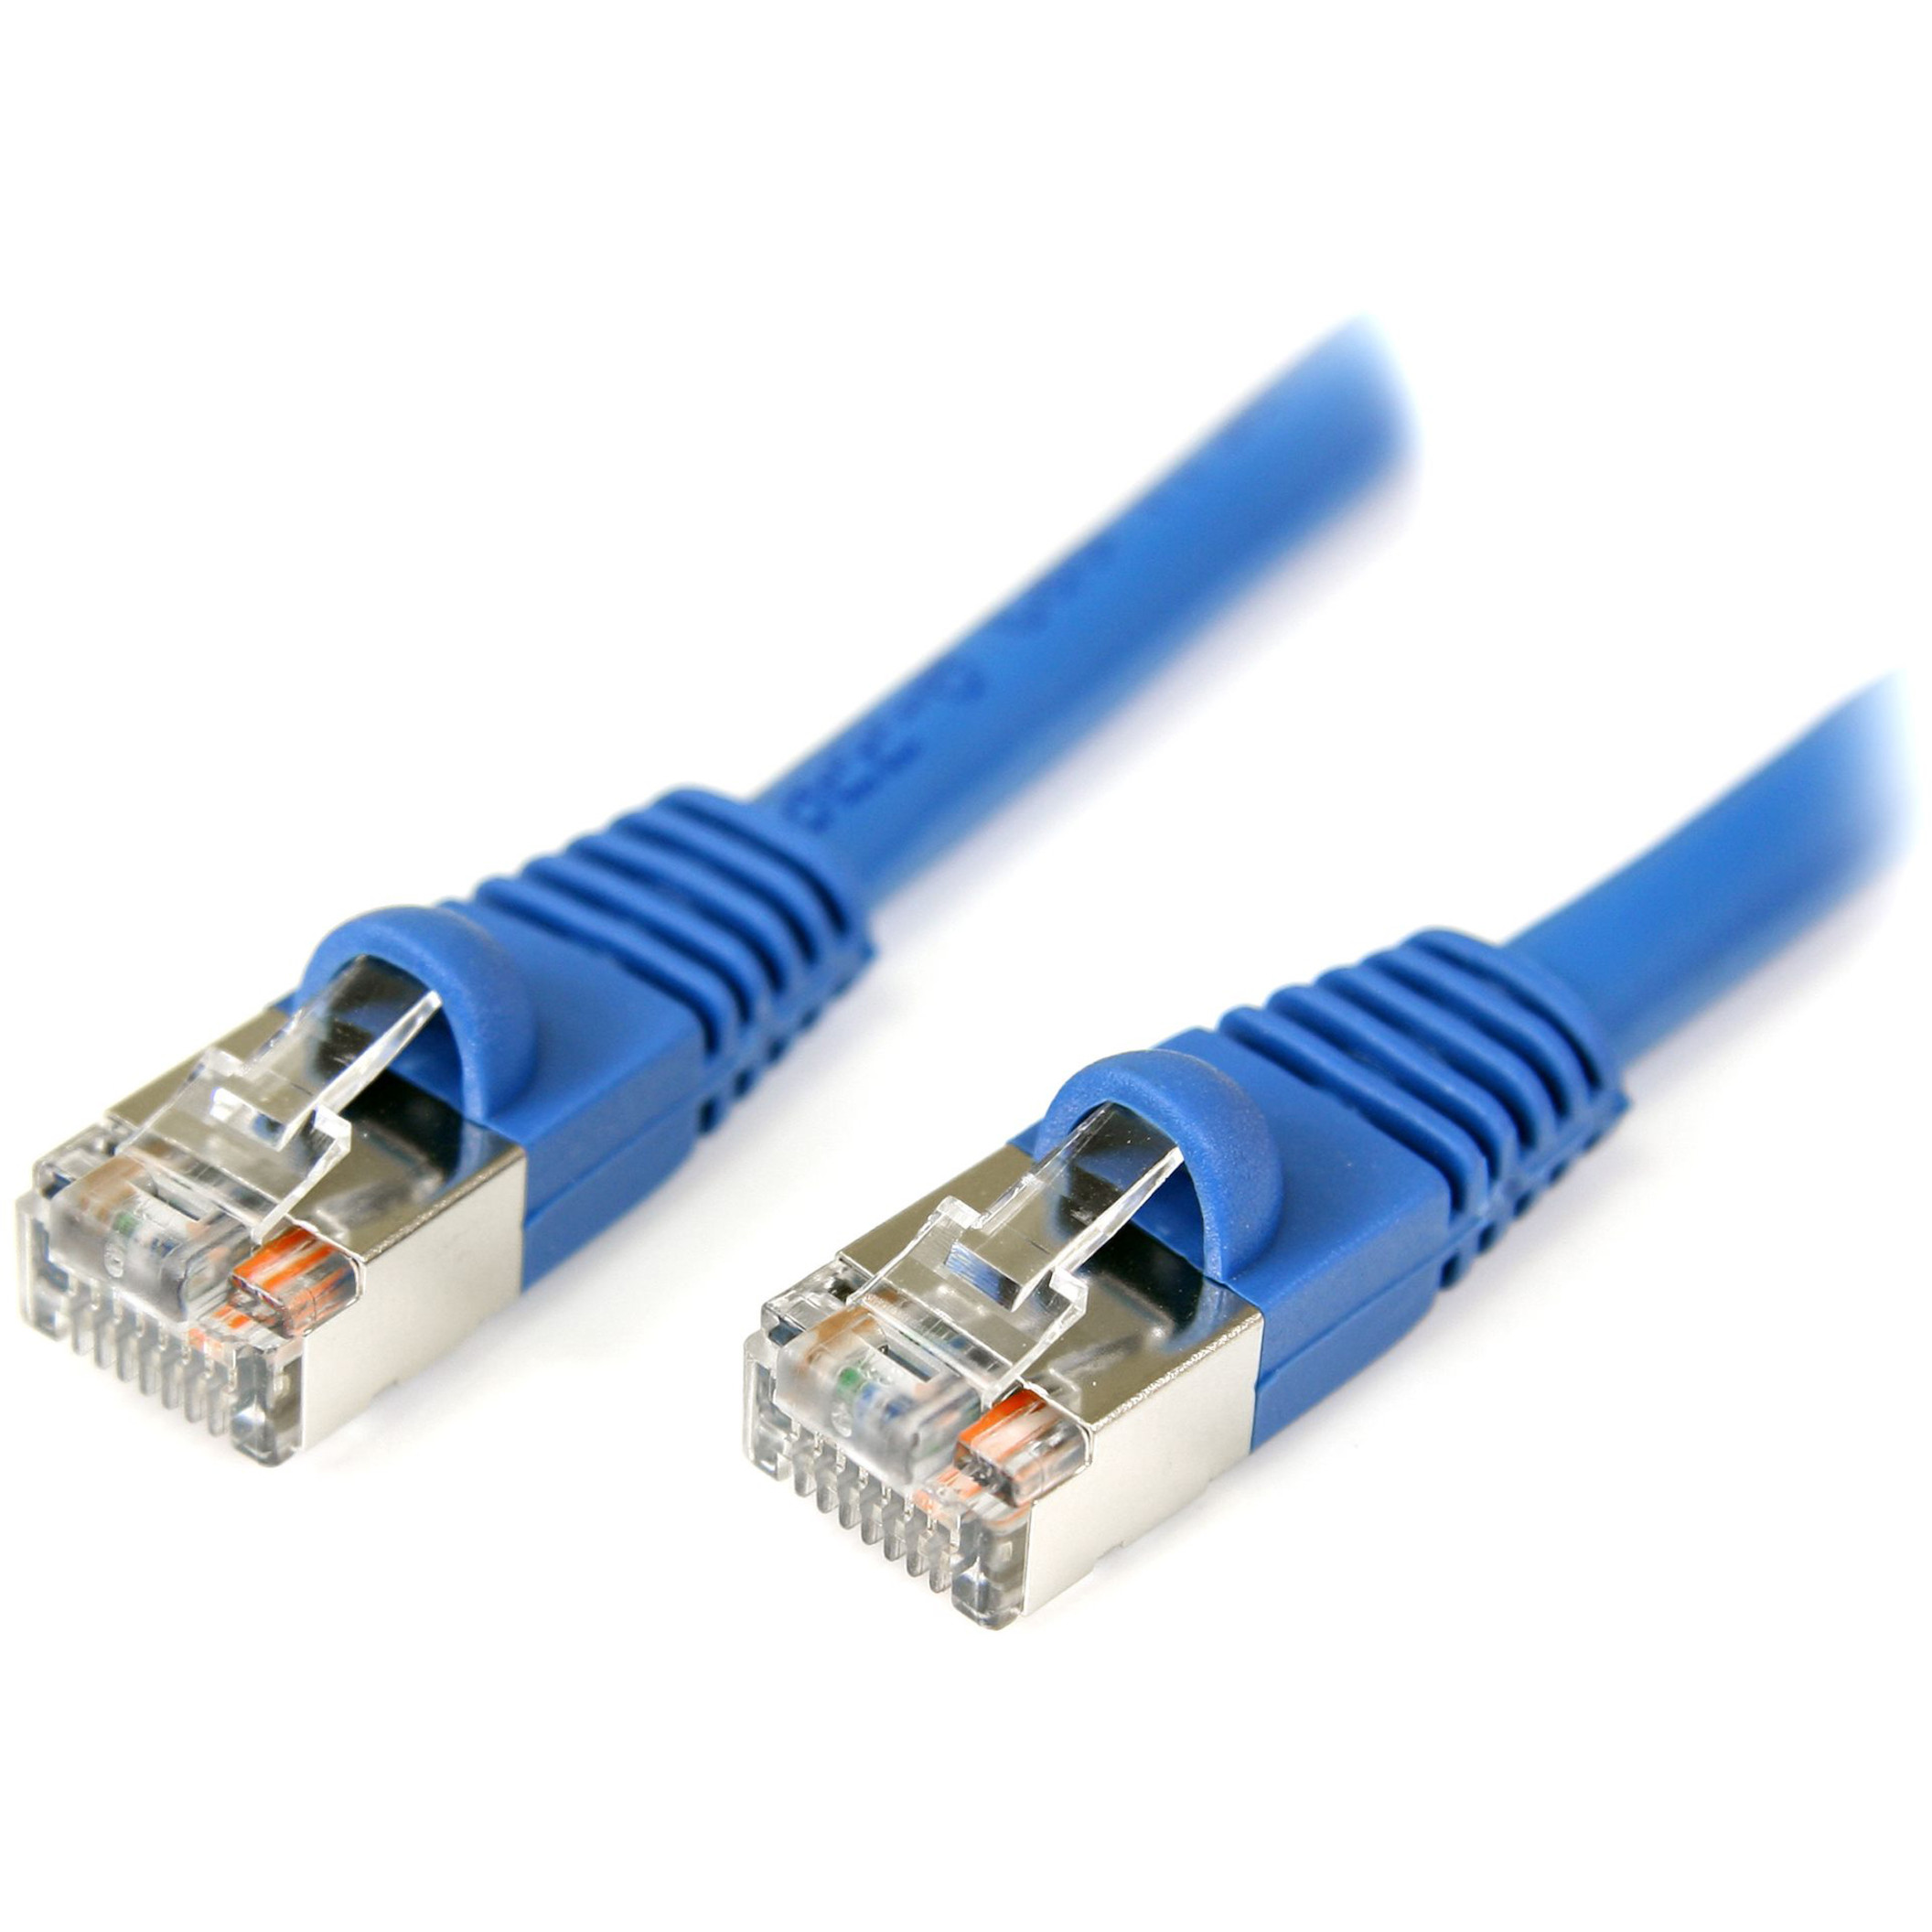 Startech .com 10 ft Blue Snagless Shielded Cat5e Patch CableMake Fast Ethernet network connections using this high quality shielded Cat5e… S45PATCH10BL